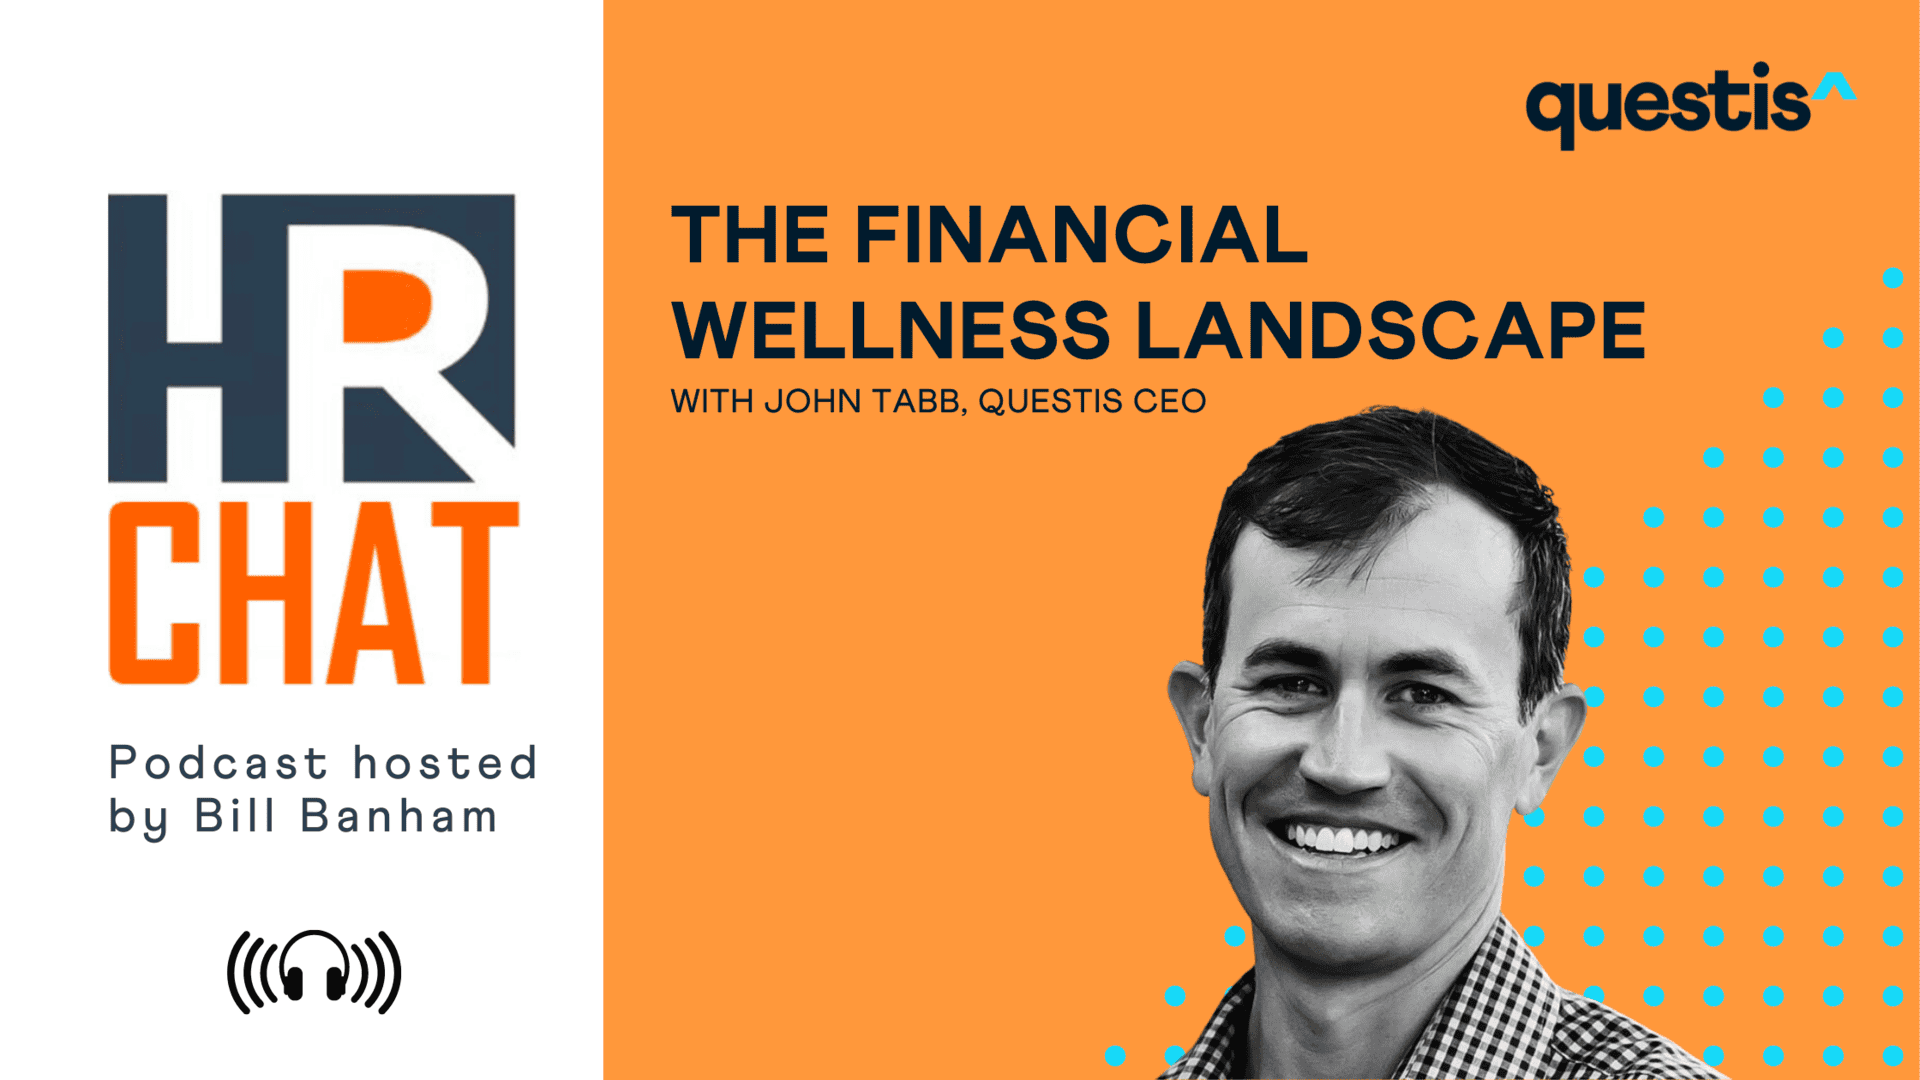 The Financial Wellness Landscape with John Tabb, CEO (HRchat Podcast)